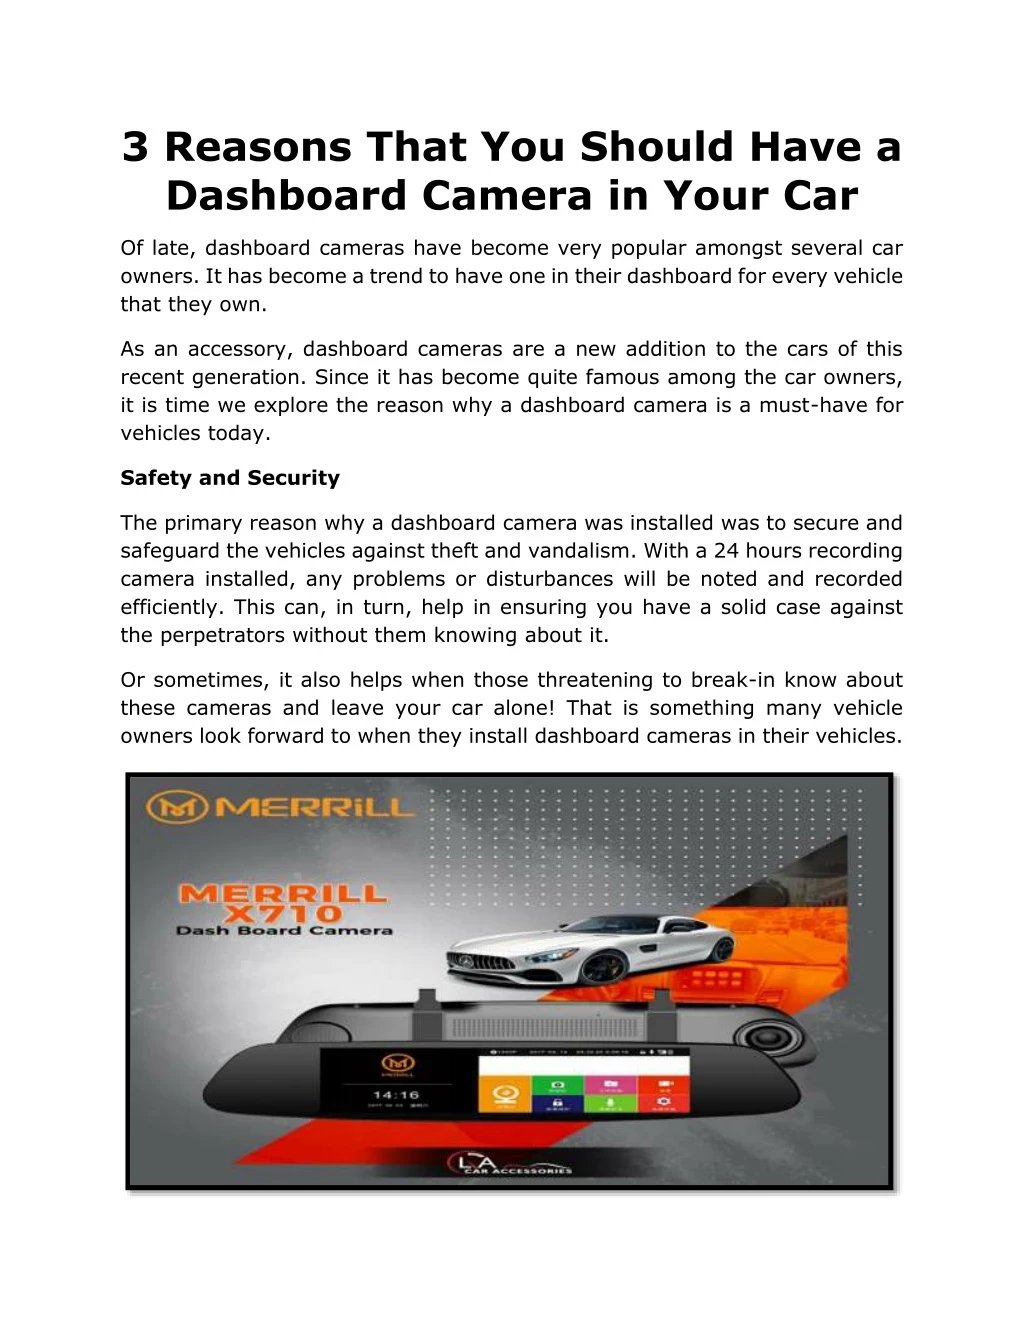 3 reasons that you should have a dashboard camera